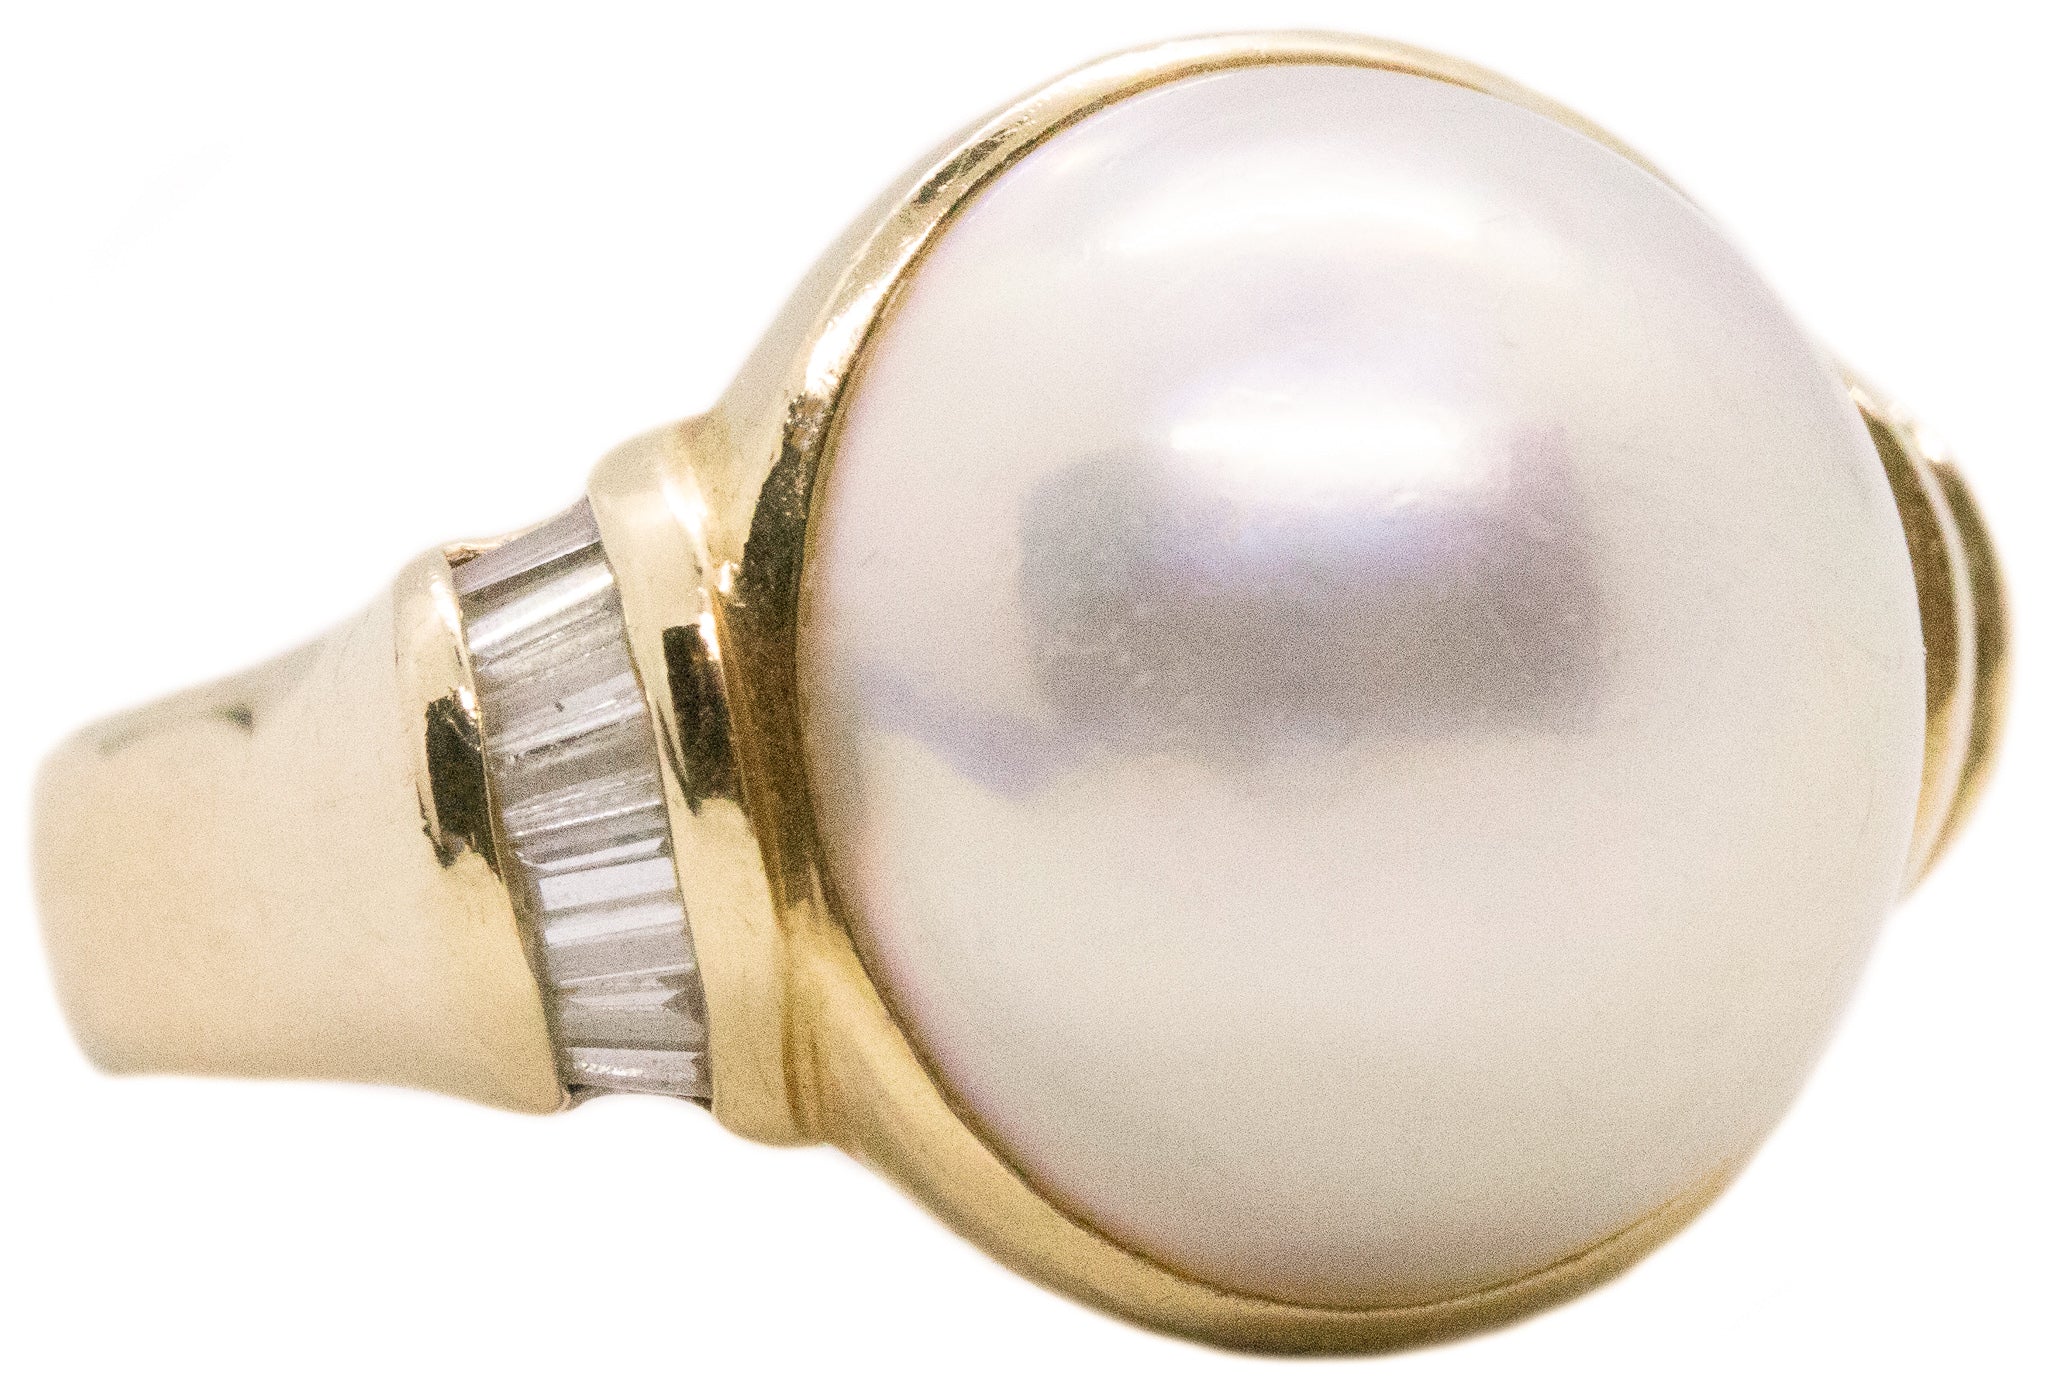 PEARL AND DIAMONDS 14 KT GOLD RING